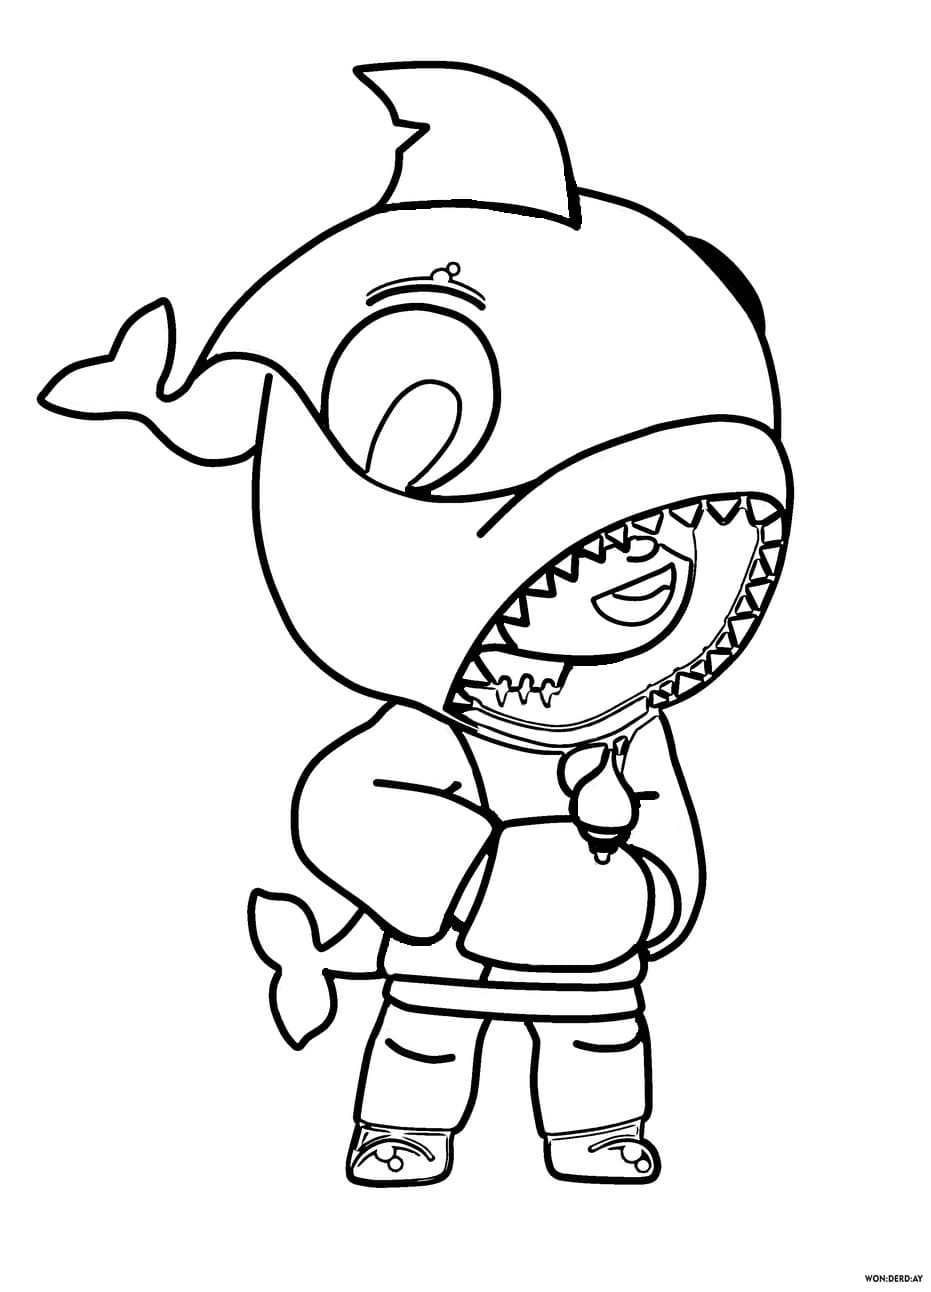 Leon Brawl Stars Coloring Pages Print For Free Wonder Day Coloring Pages For Children And Adults - coloriage skin brawl stars leon